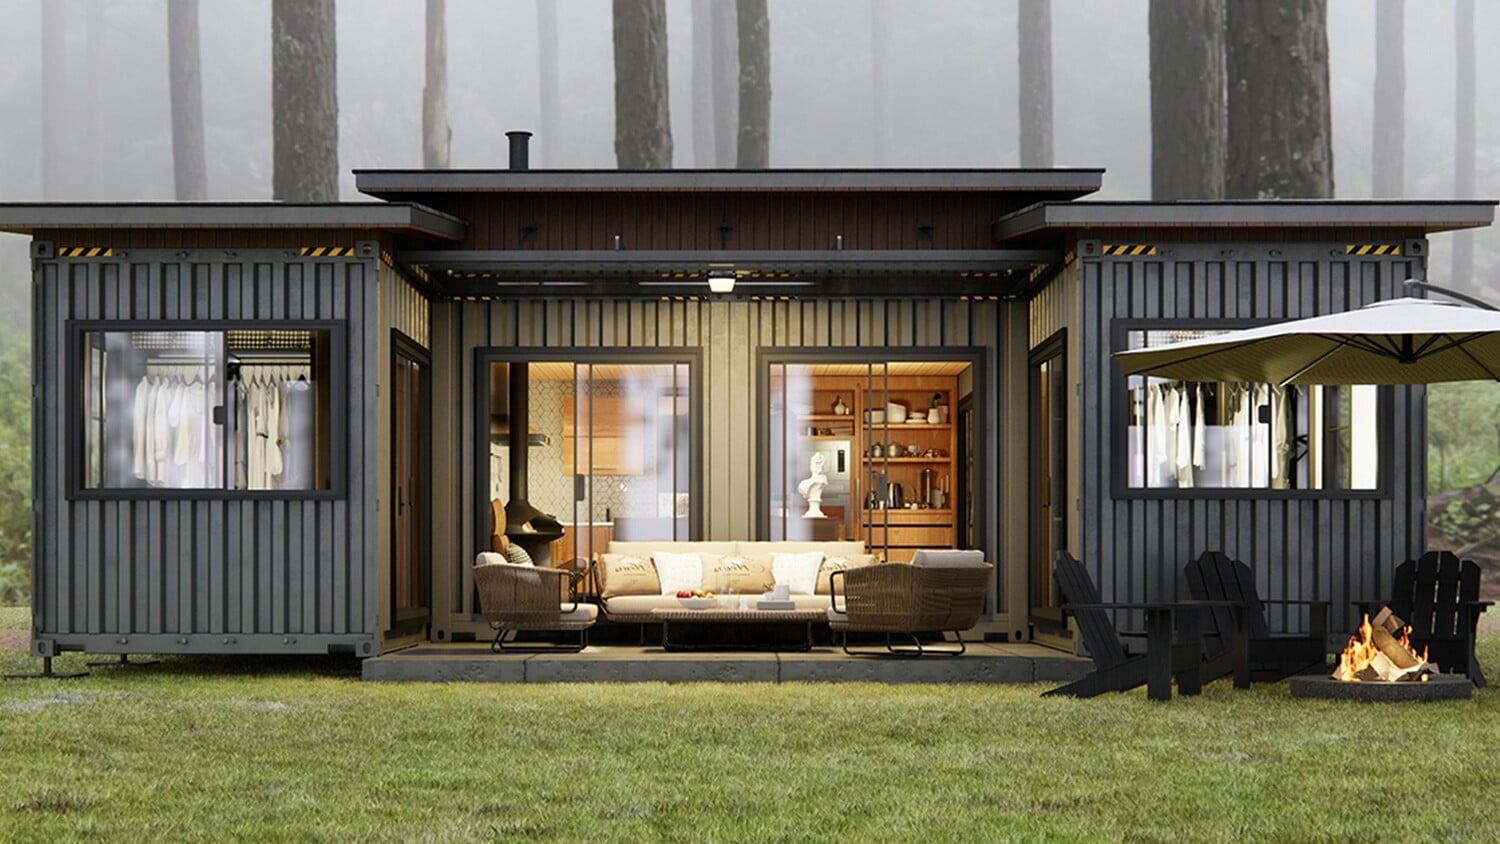 Detailed design of the container house AG21 - Aspax Construction Company